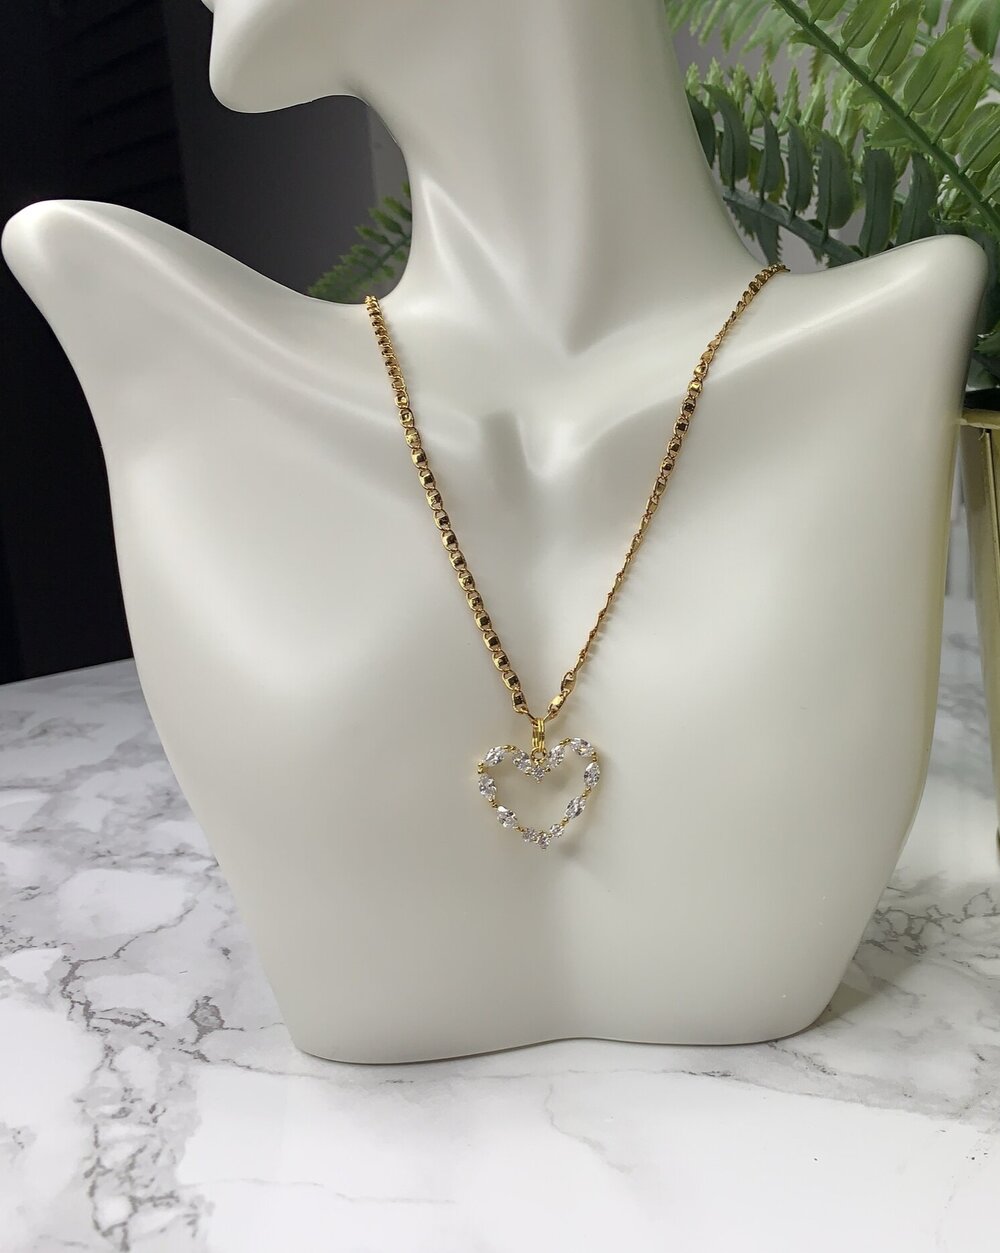 'GOLD HEARTED' NECKLACE